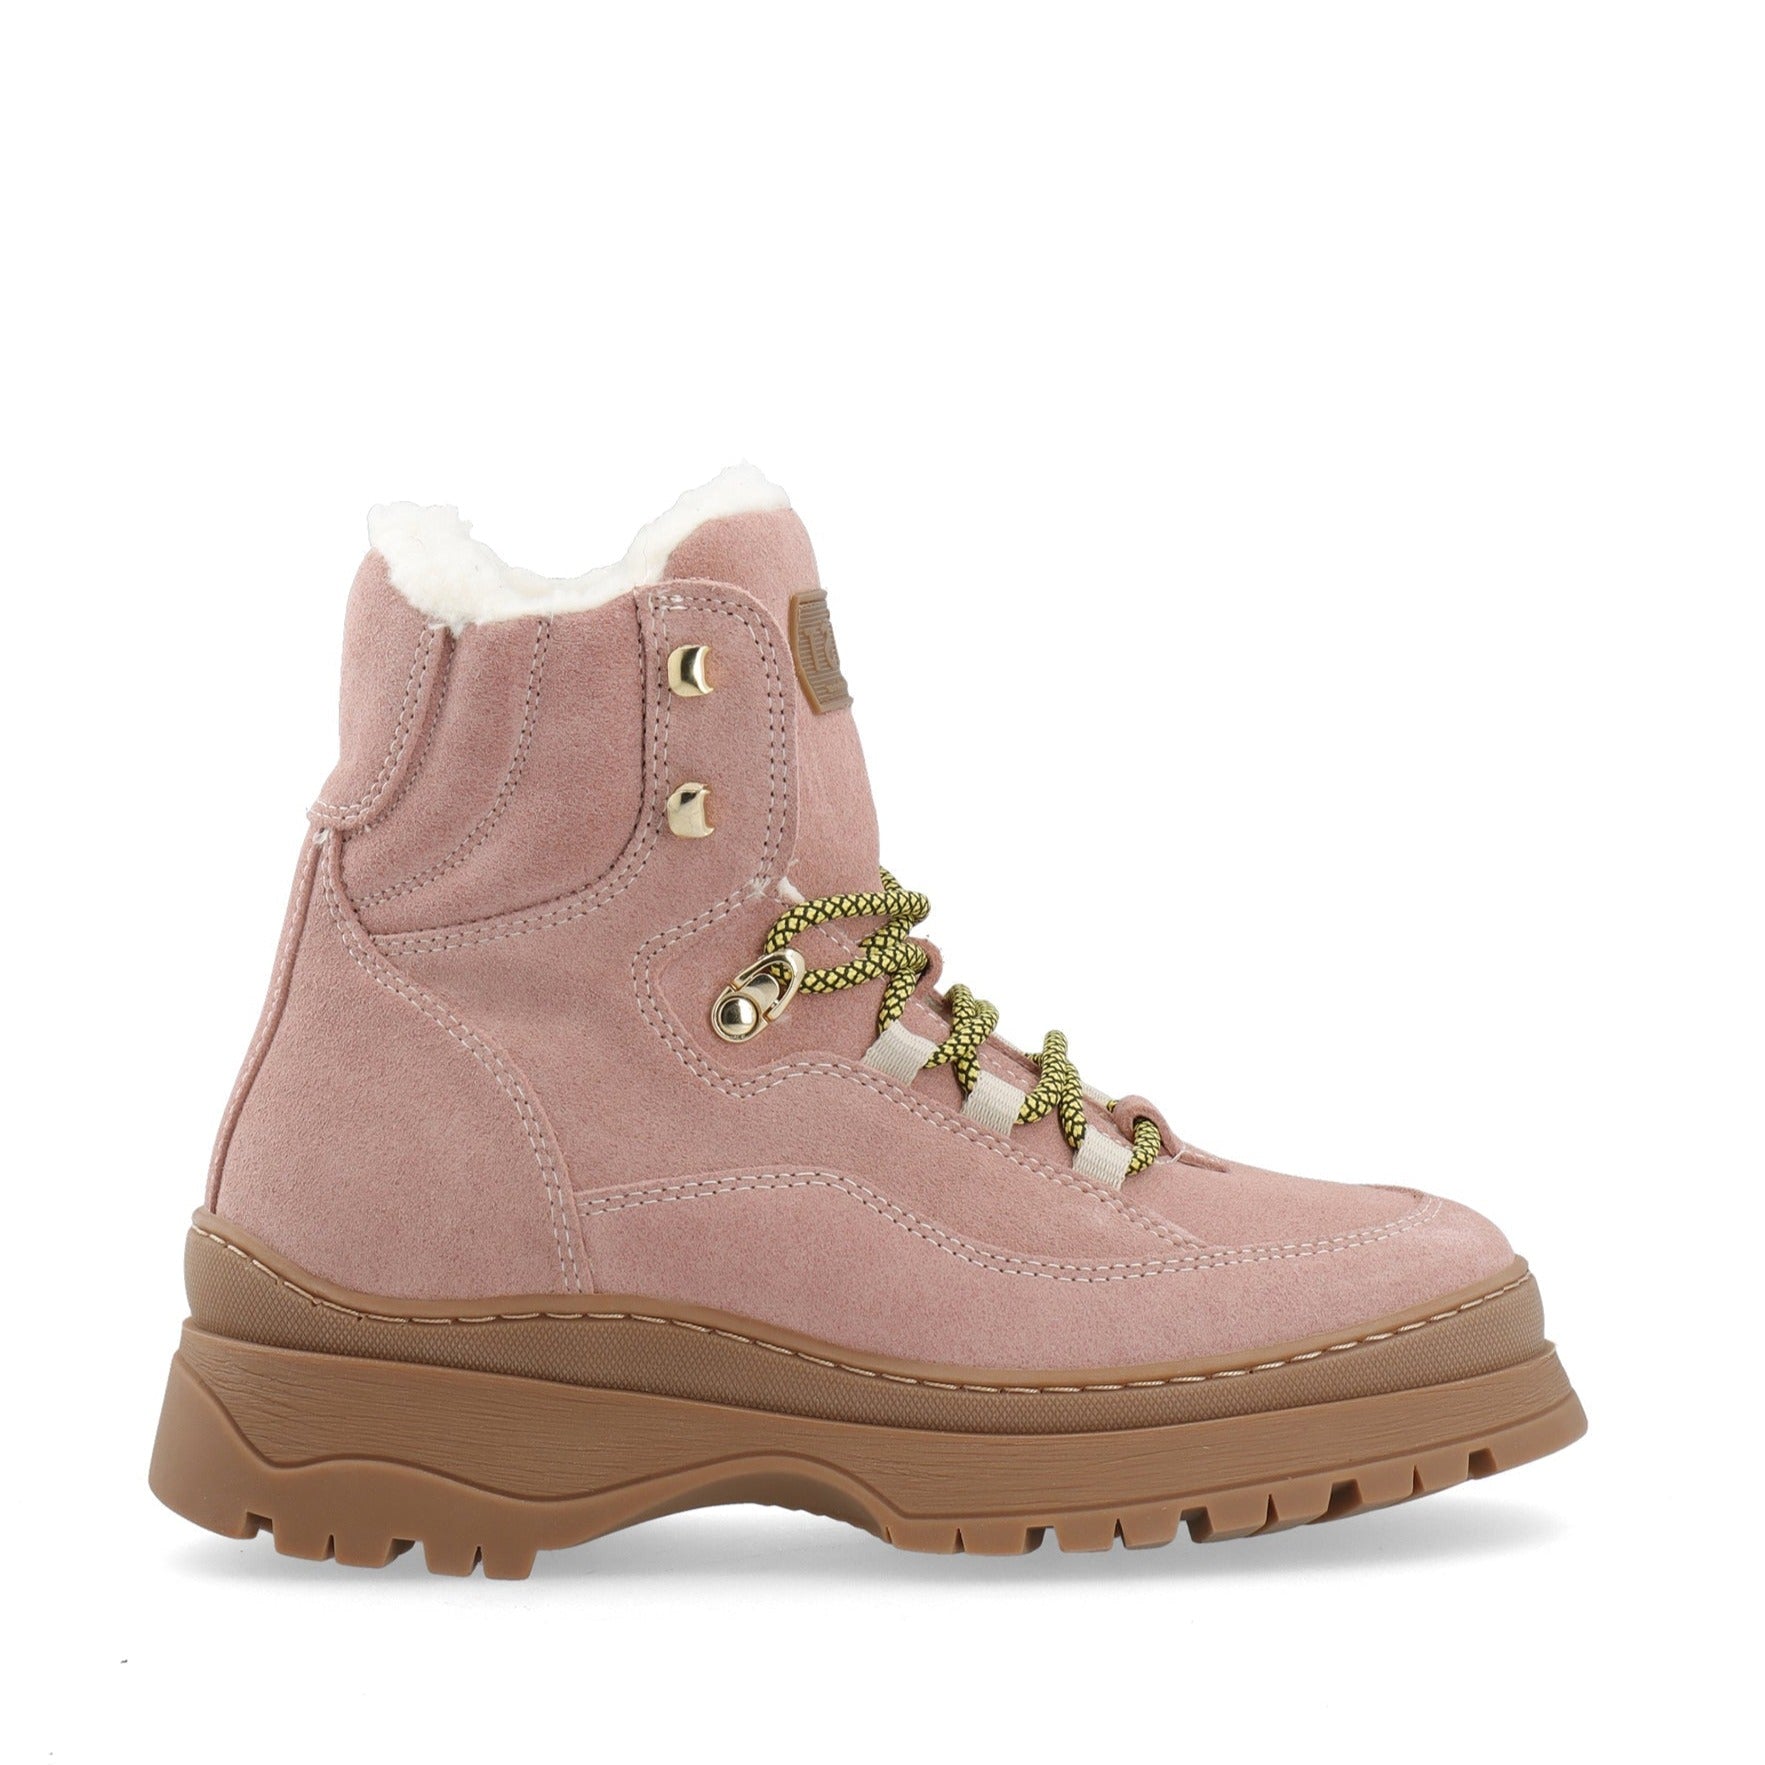 LÄST Downhill Lace-Up Boot Ankle Boots Pale Pink